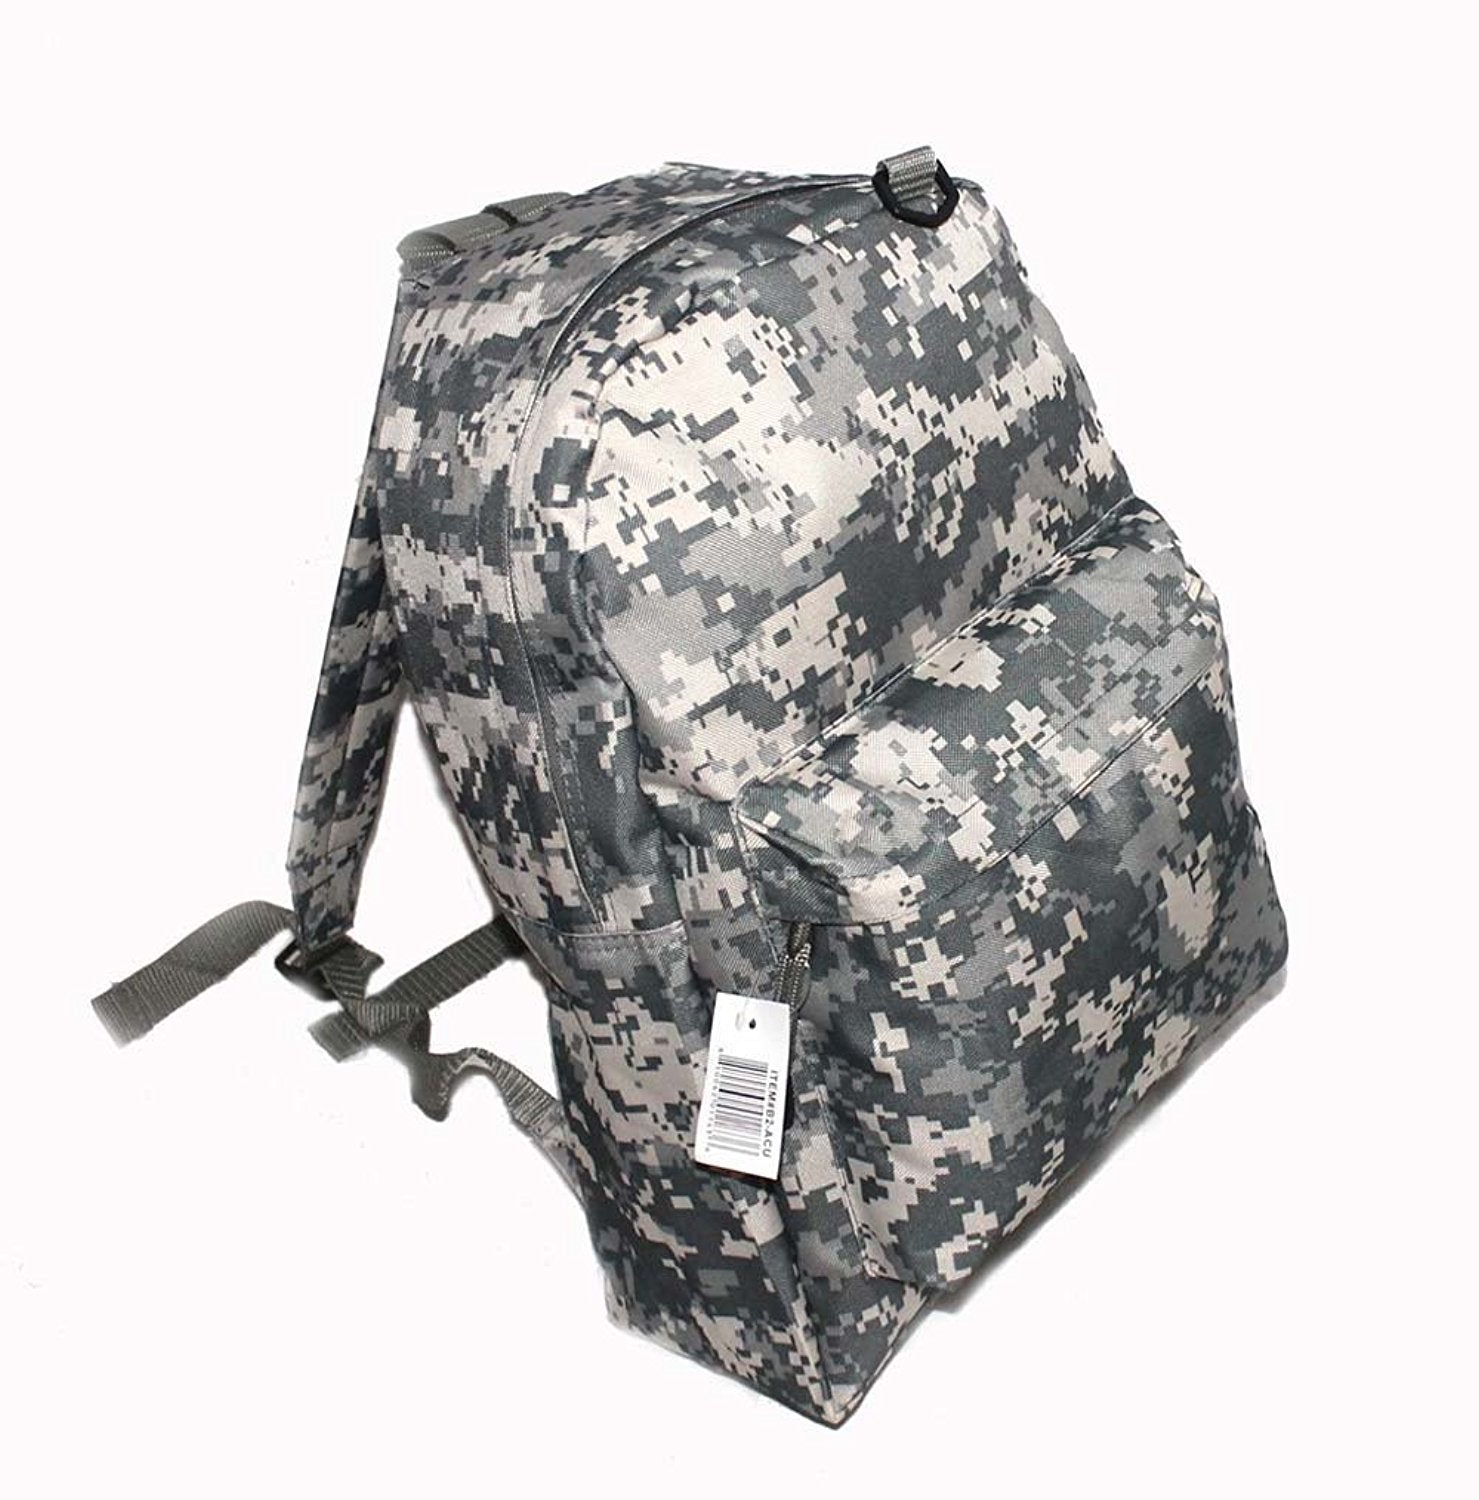 17 inch backpacks with water resistant and weather resistant heavy duty polyester material